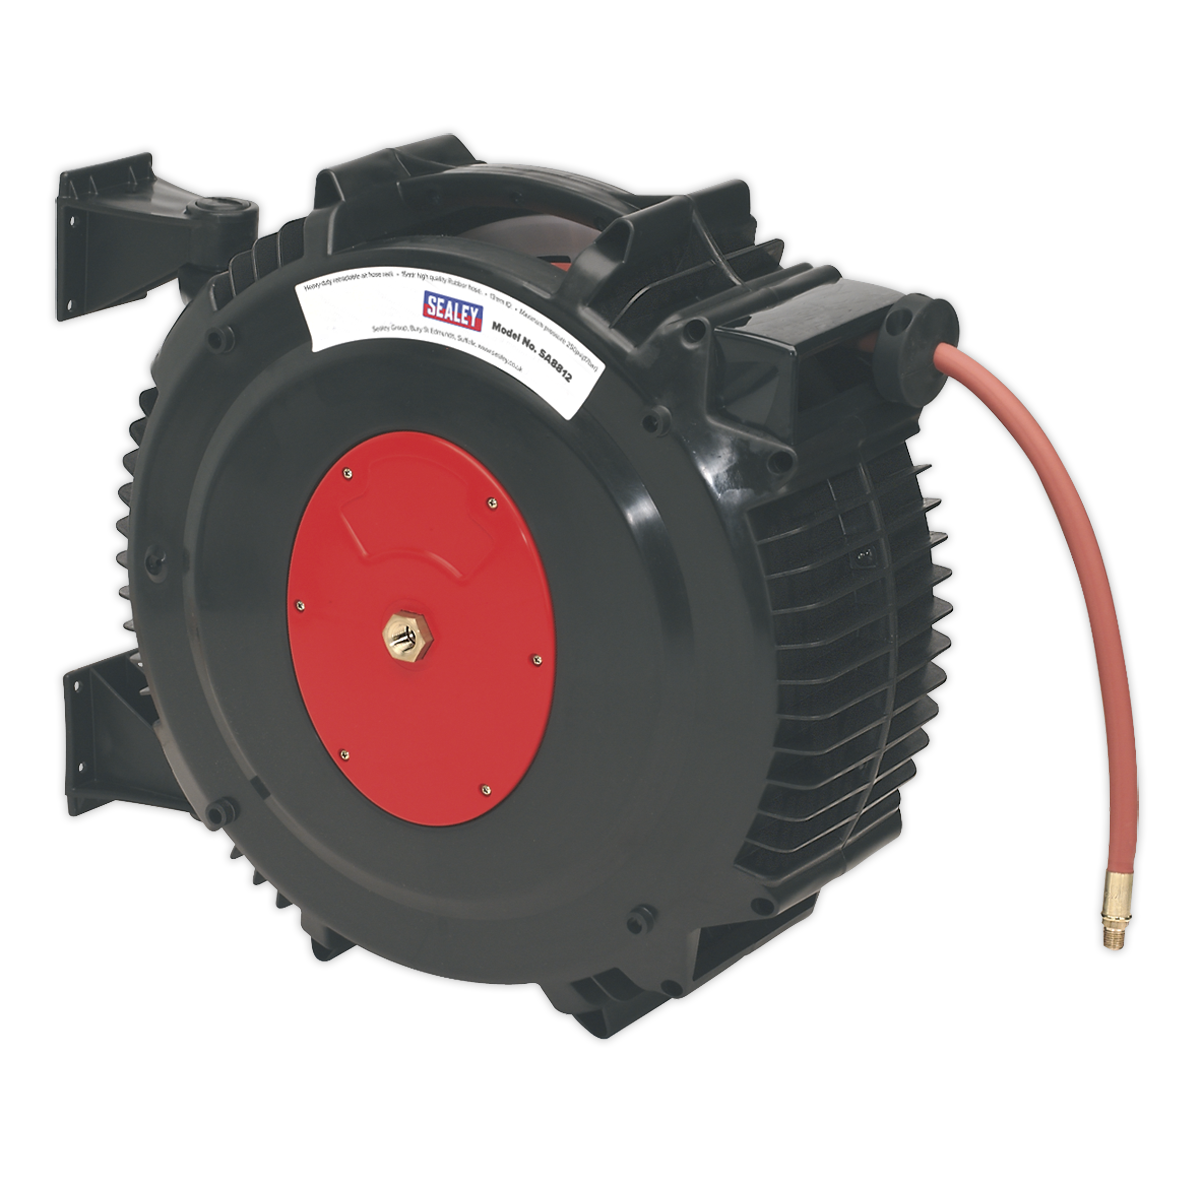 Sealey Retractable Air Hose Reel 15m 13mm ID Rubber Hose - We Sell Any Tool